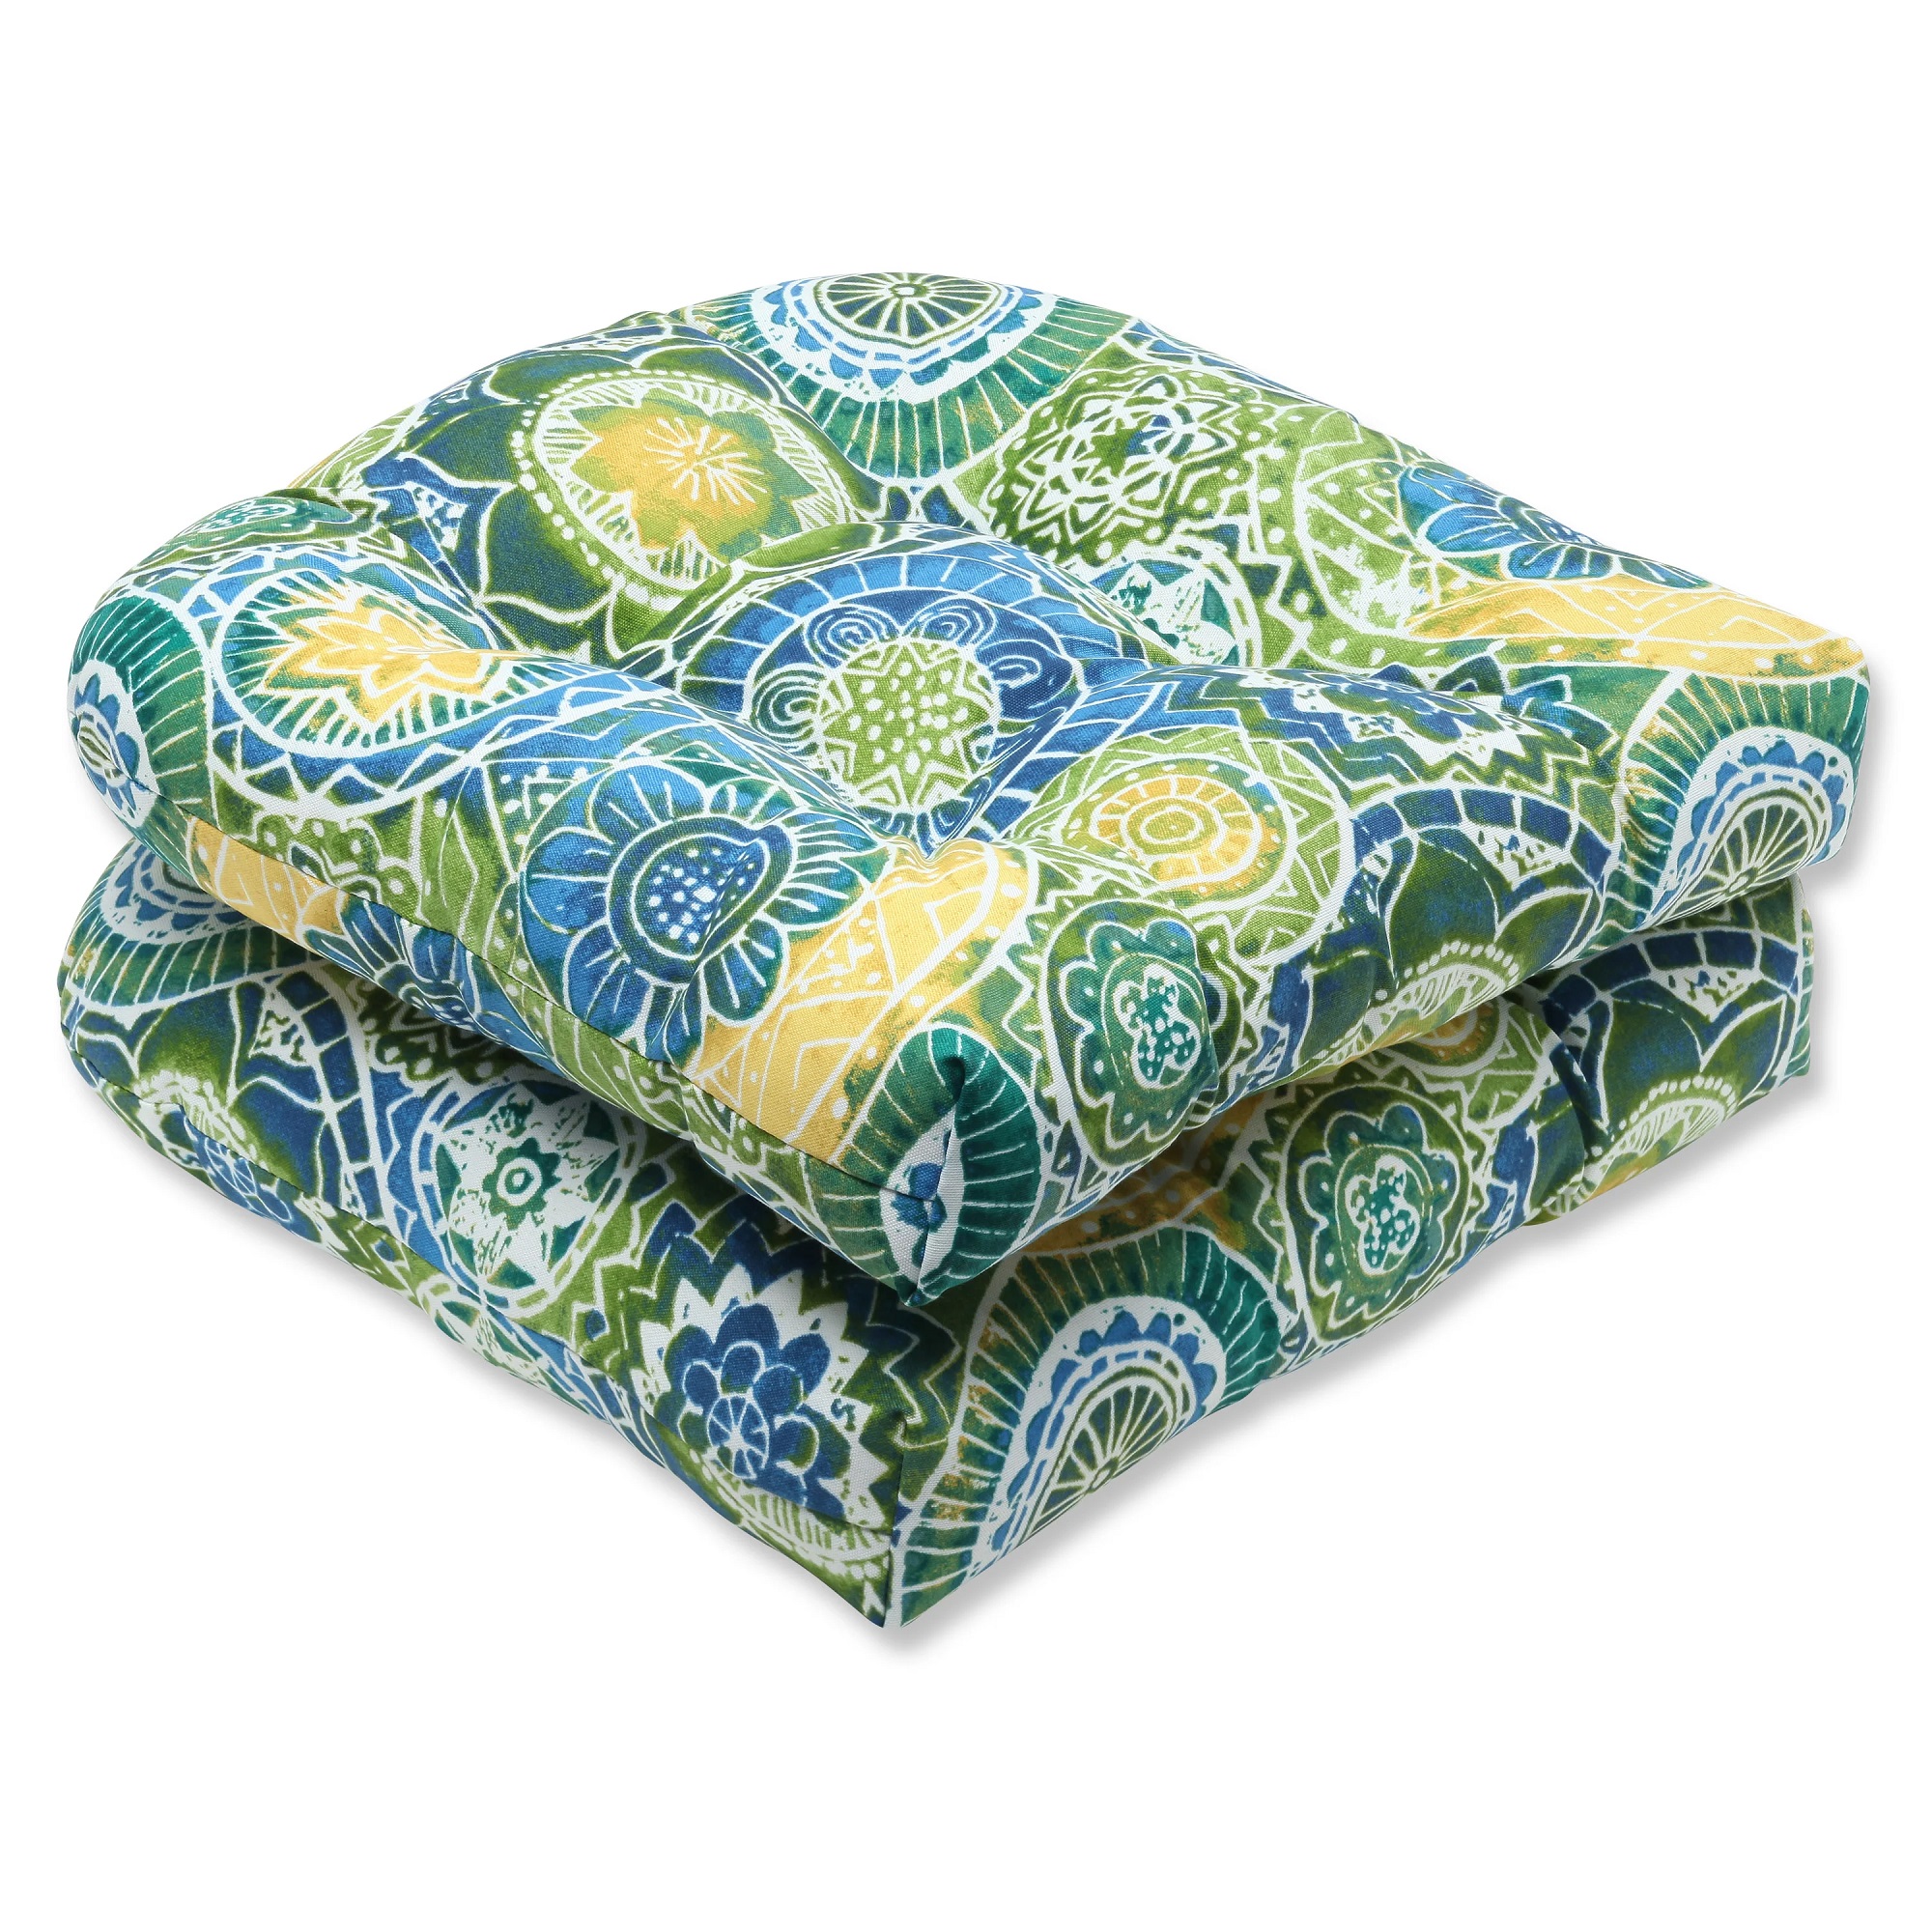 CC Outdoor Living Set of 2 Green and Yellow Mandalas Outdoor Patio Wicker Chair Cushions 19"